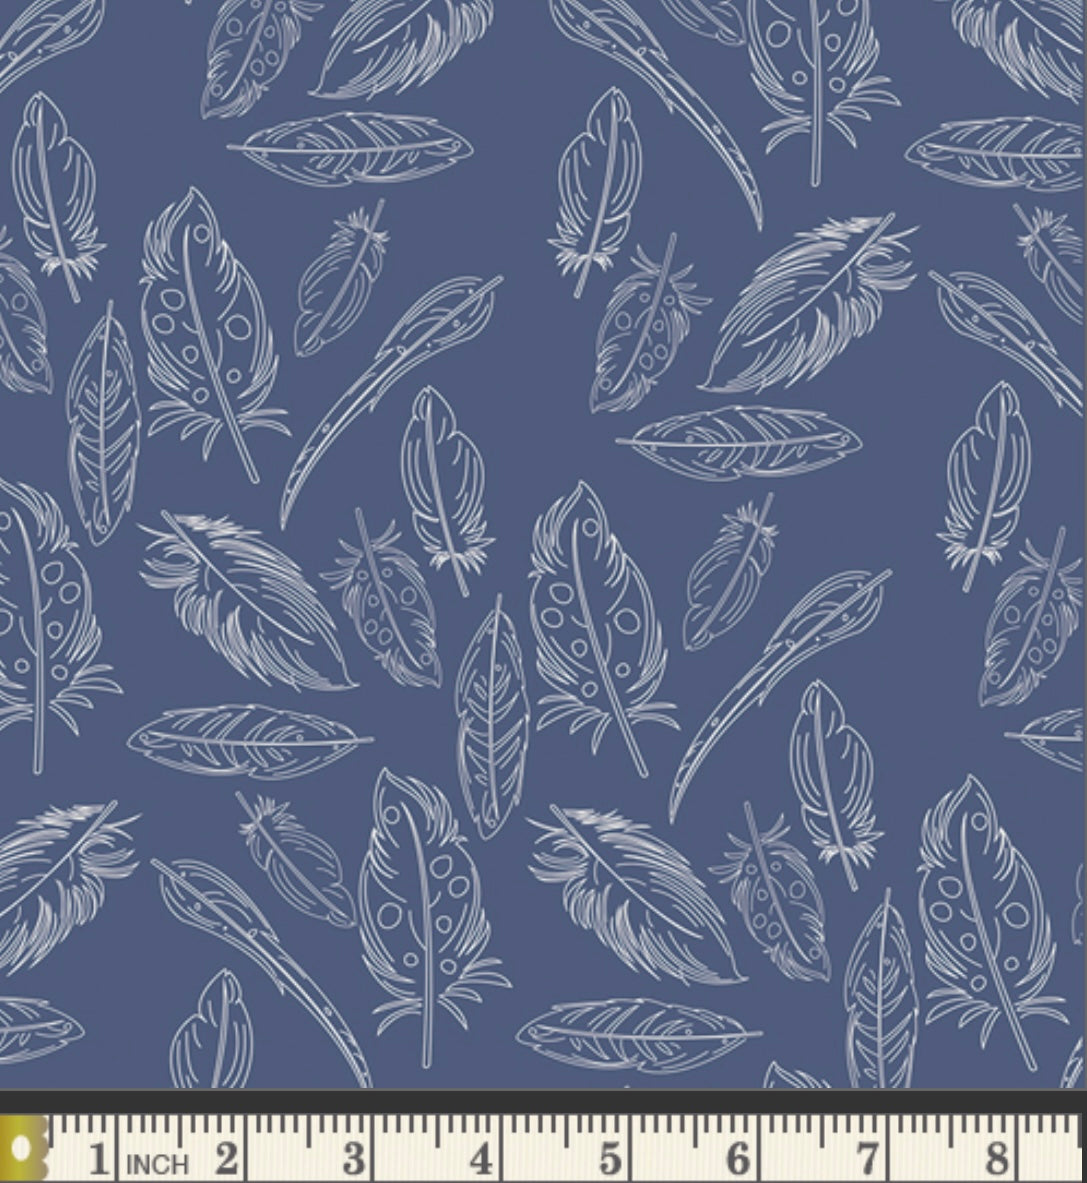 SALE Garden of Opulence by Art Gallery Fabrics - Panache (sold in 25cm  (10") increments)